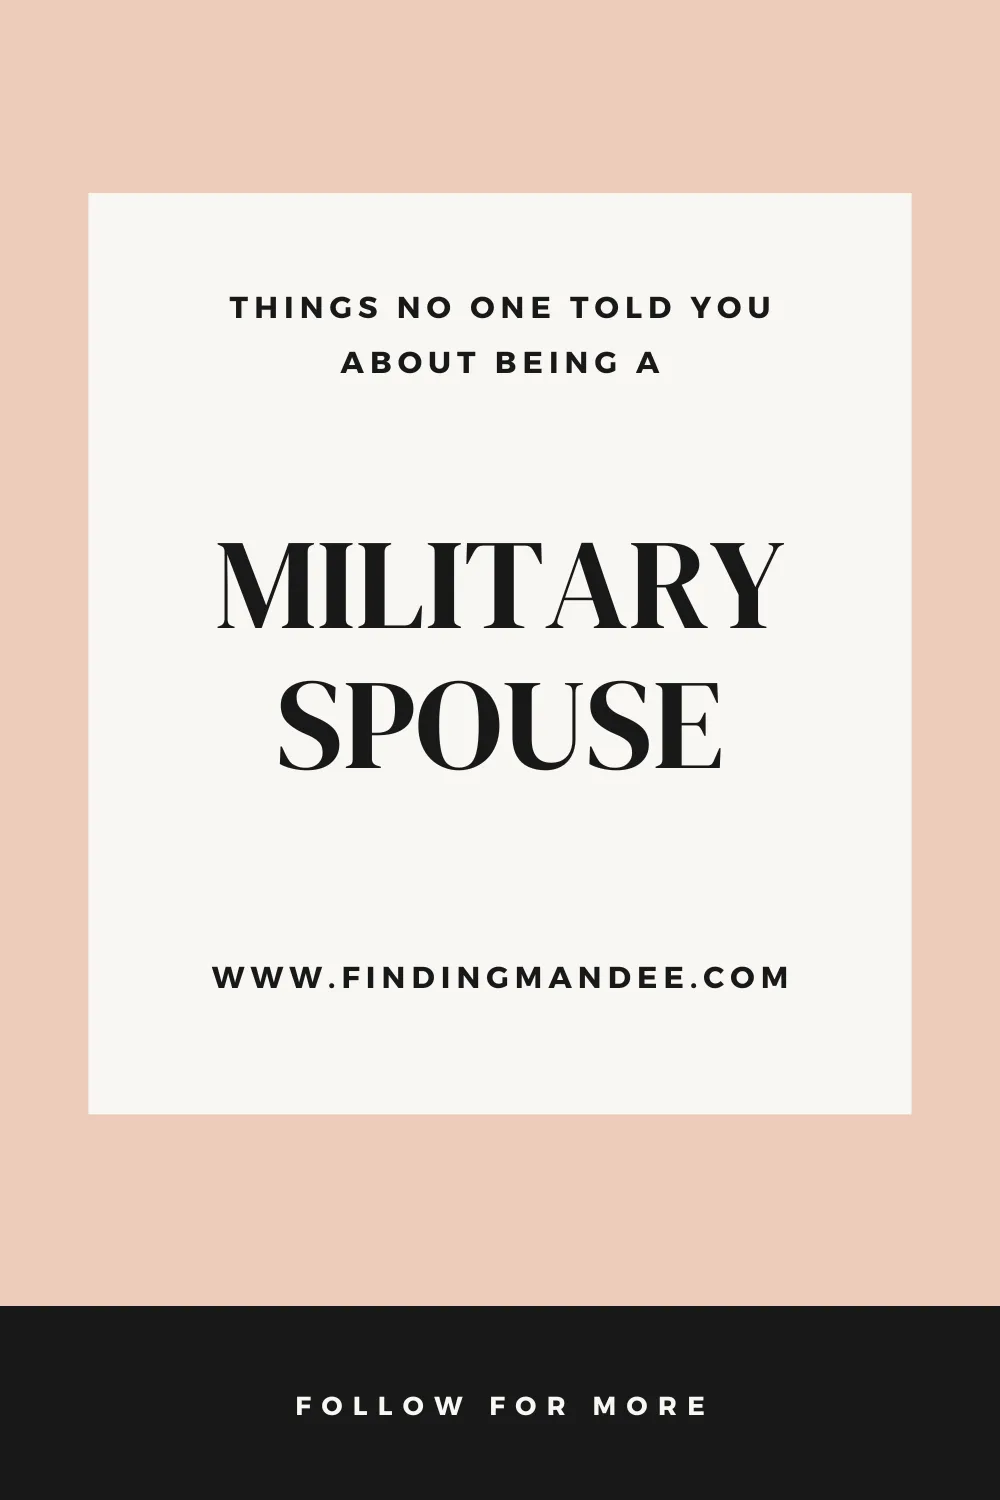 Things No One Told You About Being a Military Spouse | Finding Mandee